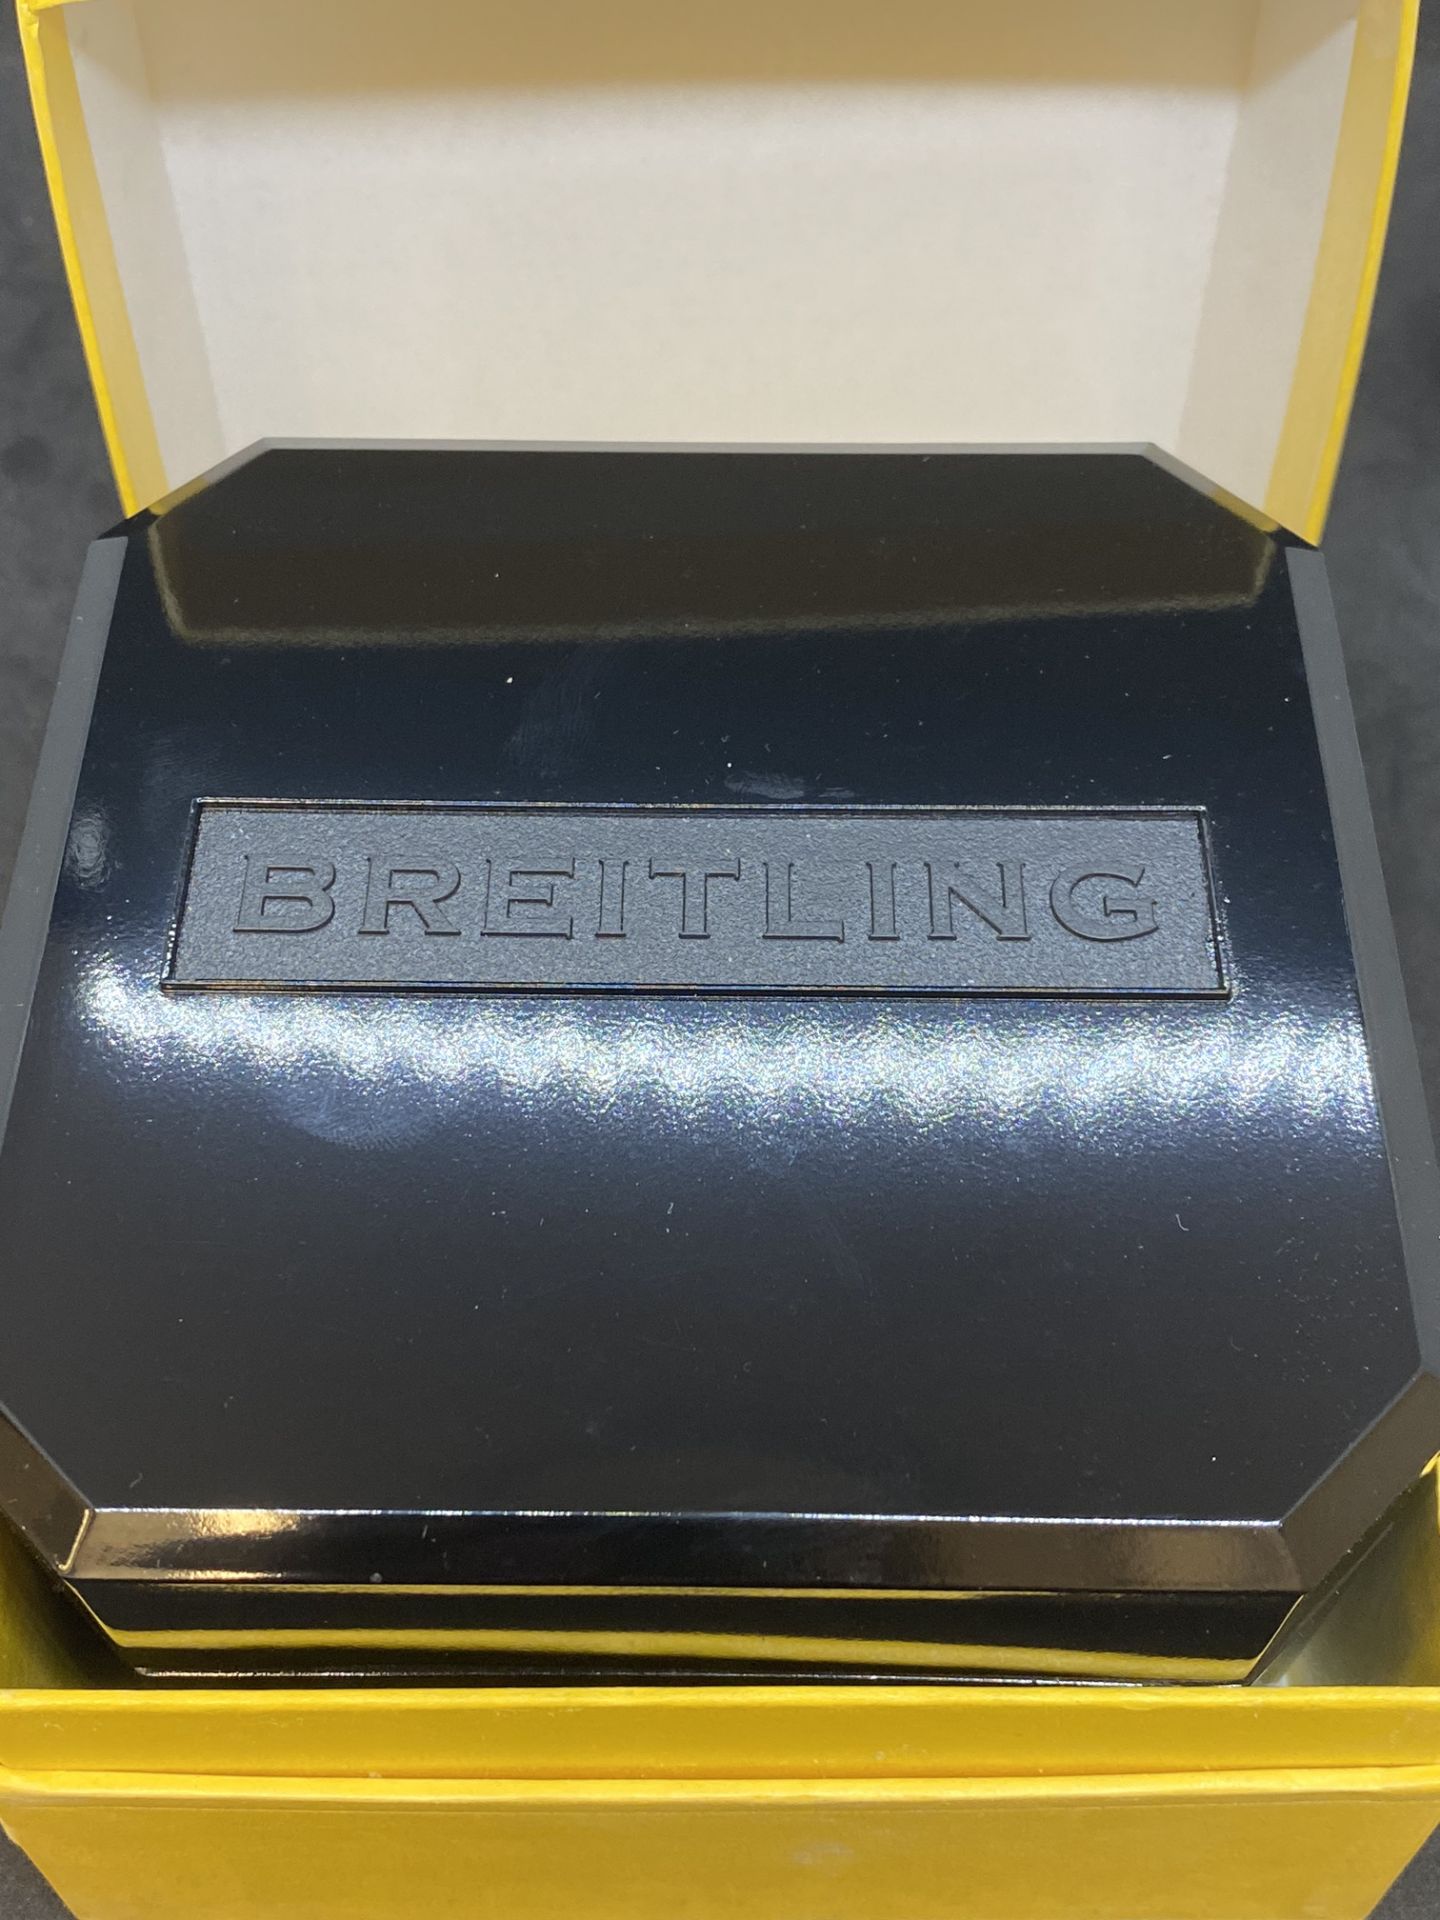 Breitling Super Avenger A13370 Stainless Steel Watch with Box - Image 11 of 11